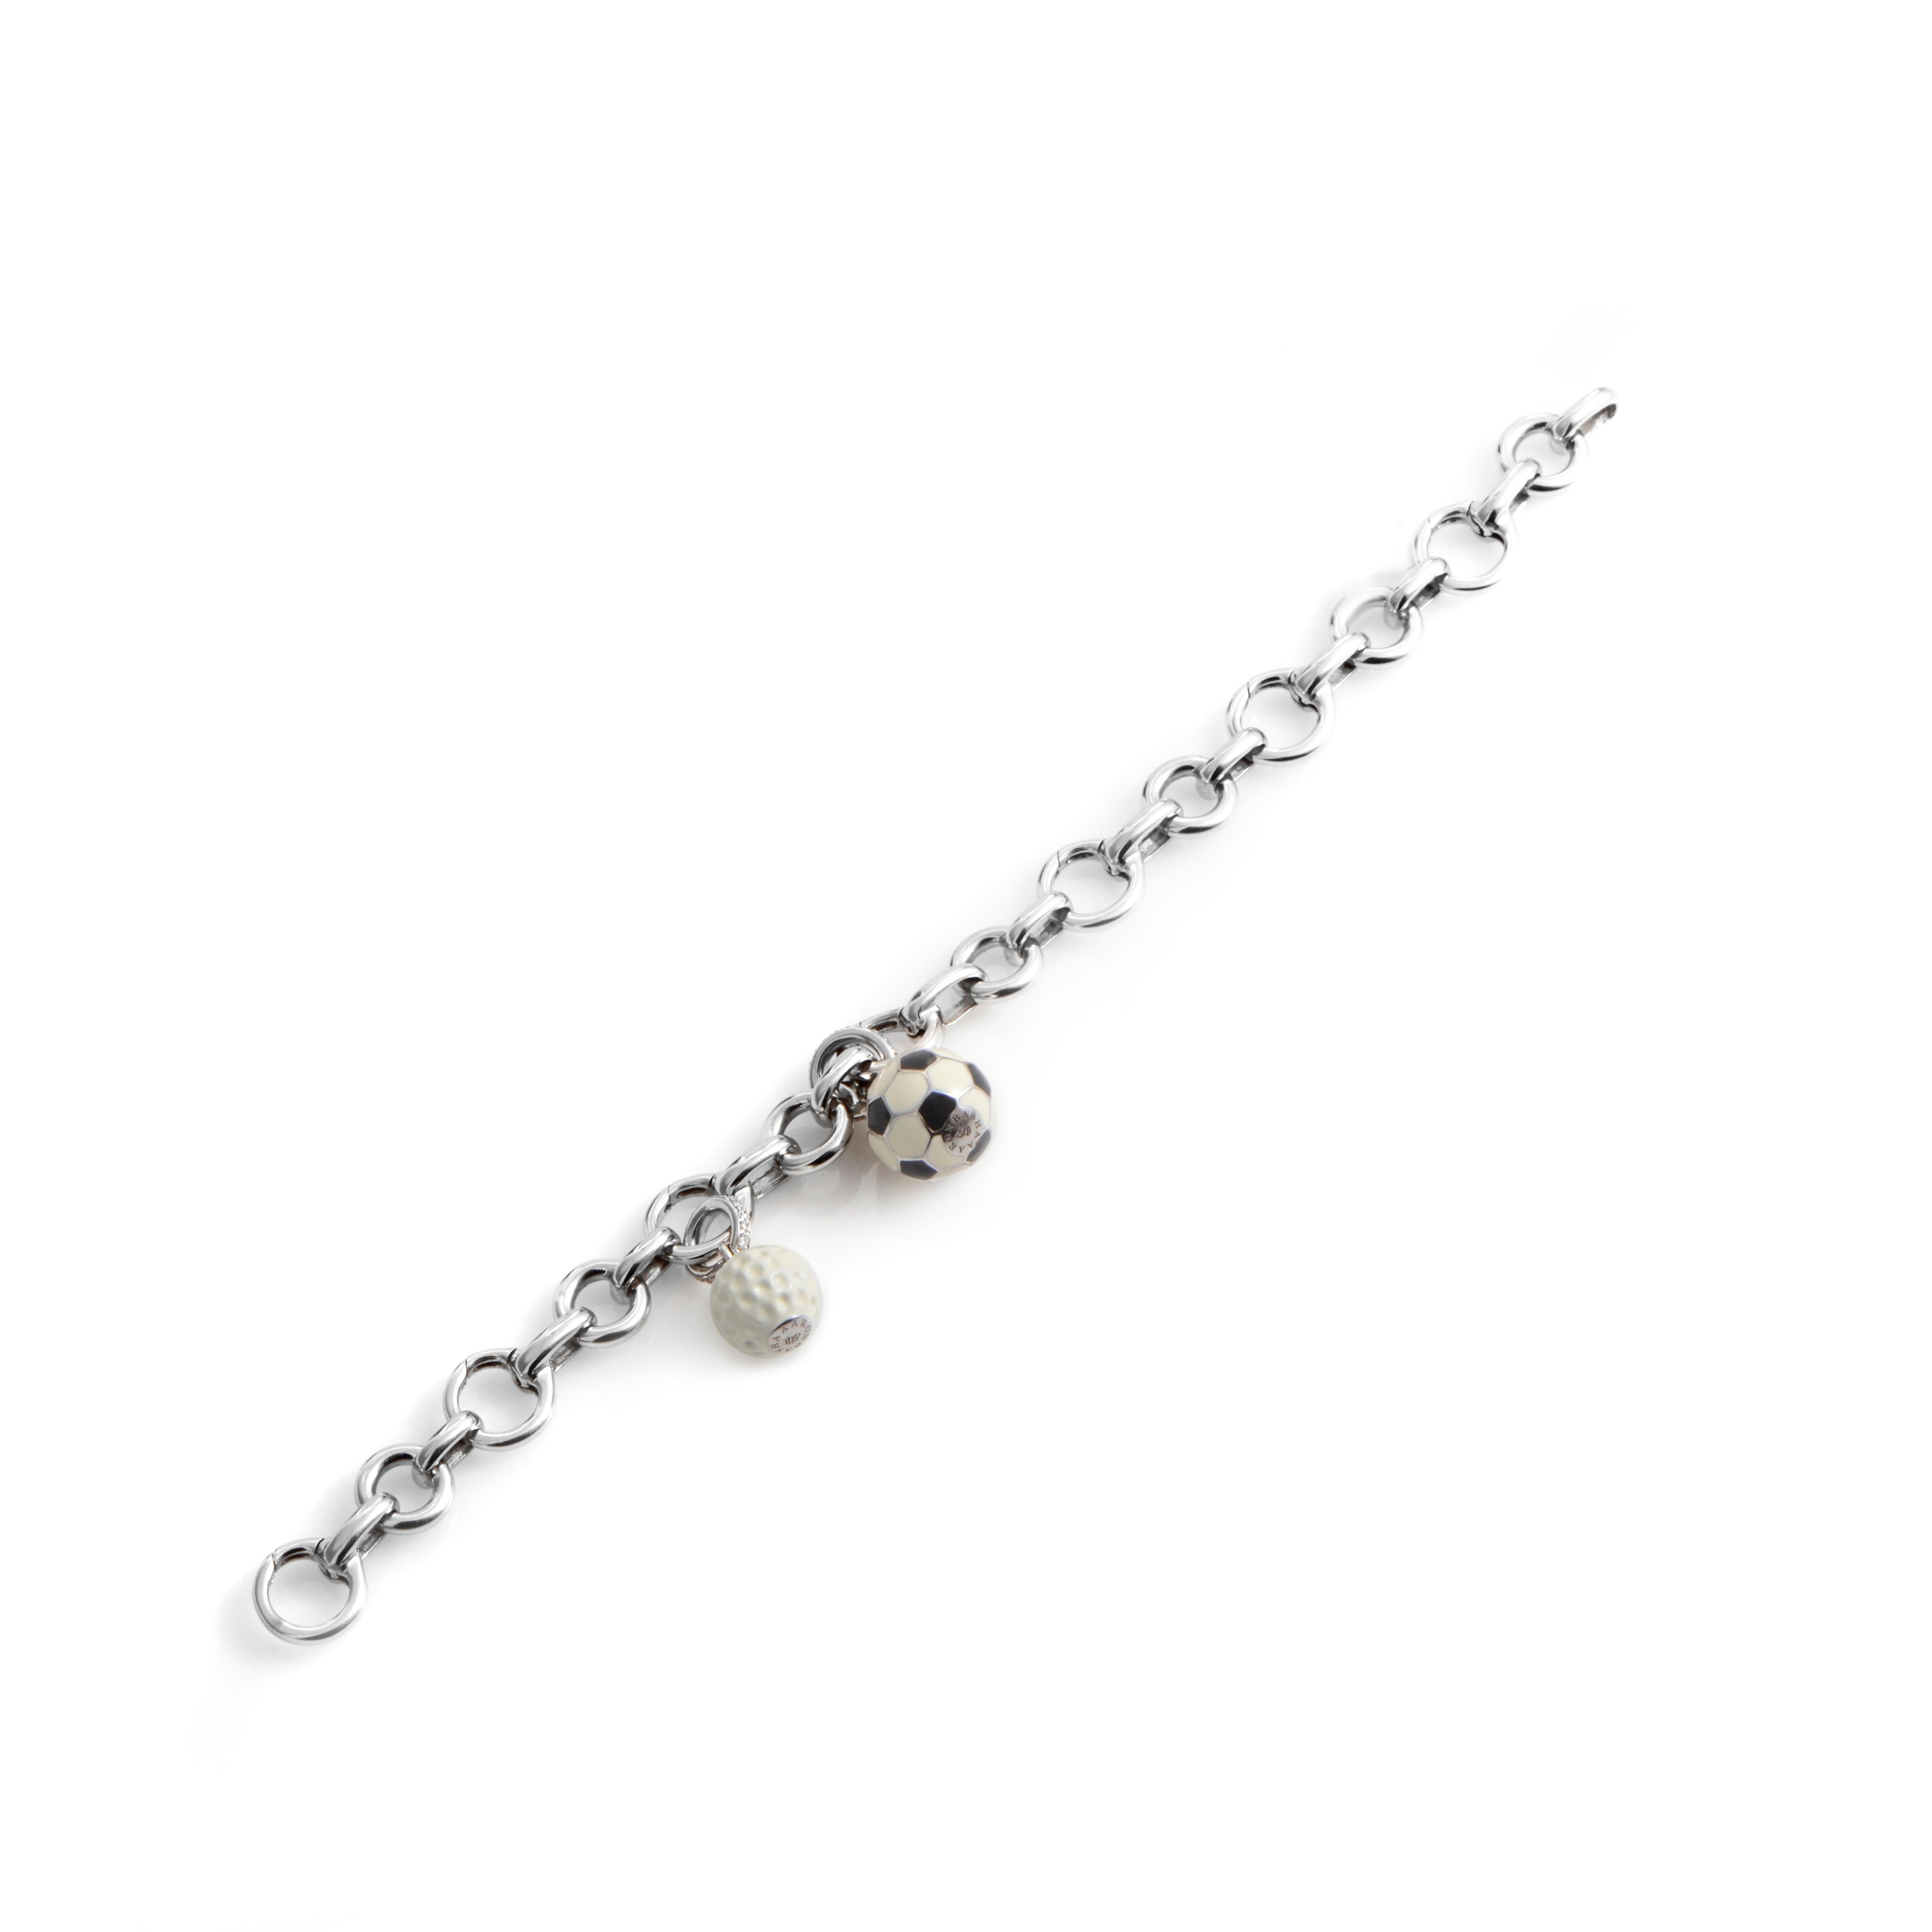 Indulge yourself with this fantastically designed charm bracelet from Aaron Basha! The bracelet is made of 18K white gold and is comprised of heart-shaped links. Dangling from the links are a lacquered golf ball and soccer ball charm.